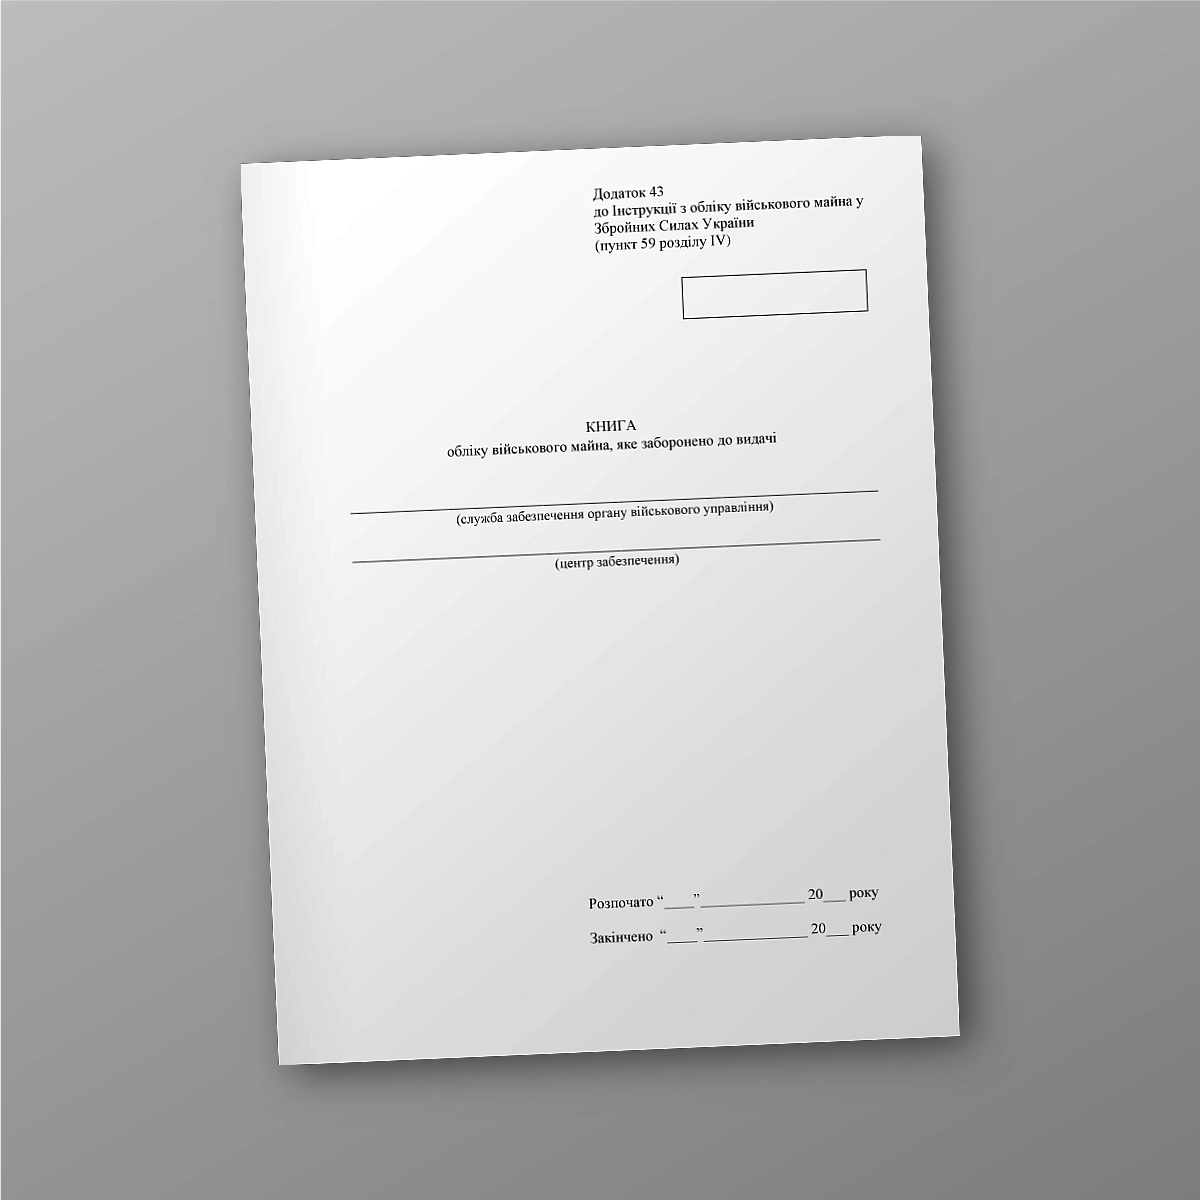 Record book of military property that is prohibited from being issued | PrintTo: